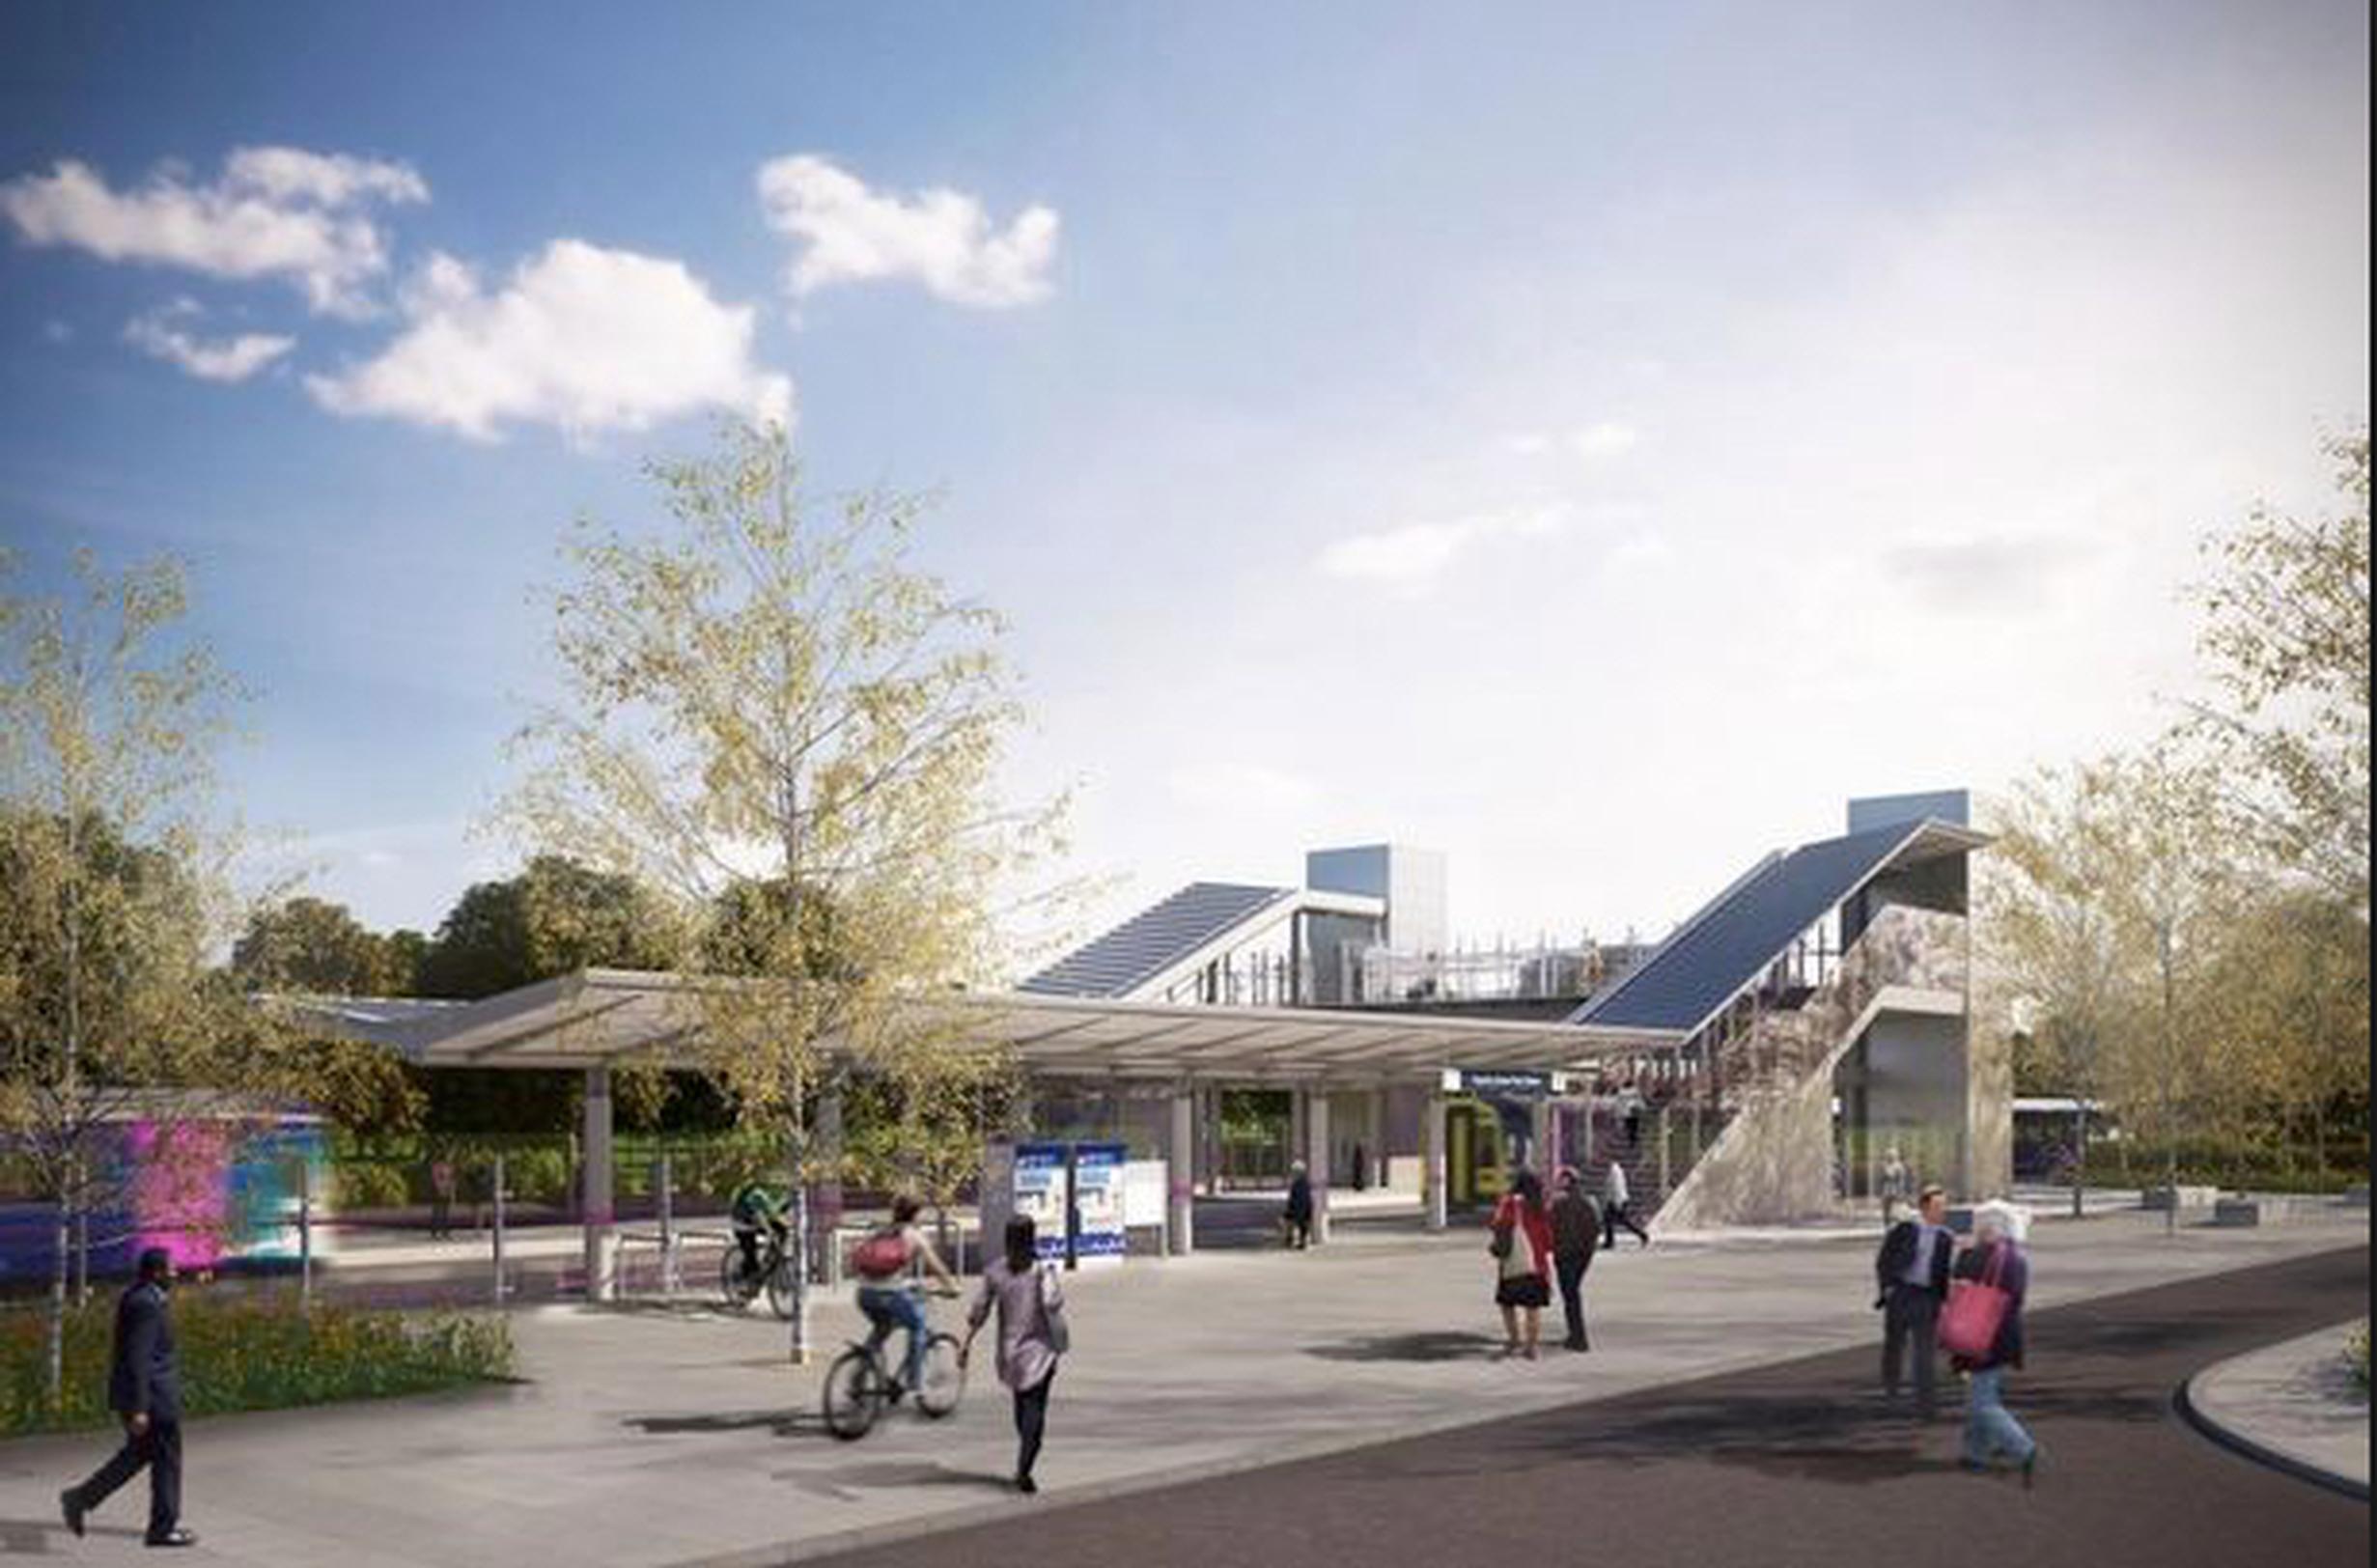 The new Reading Green Park station has the potential to unlock 7,500 new jobs and 1,500 homes, say developers